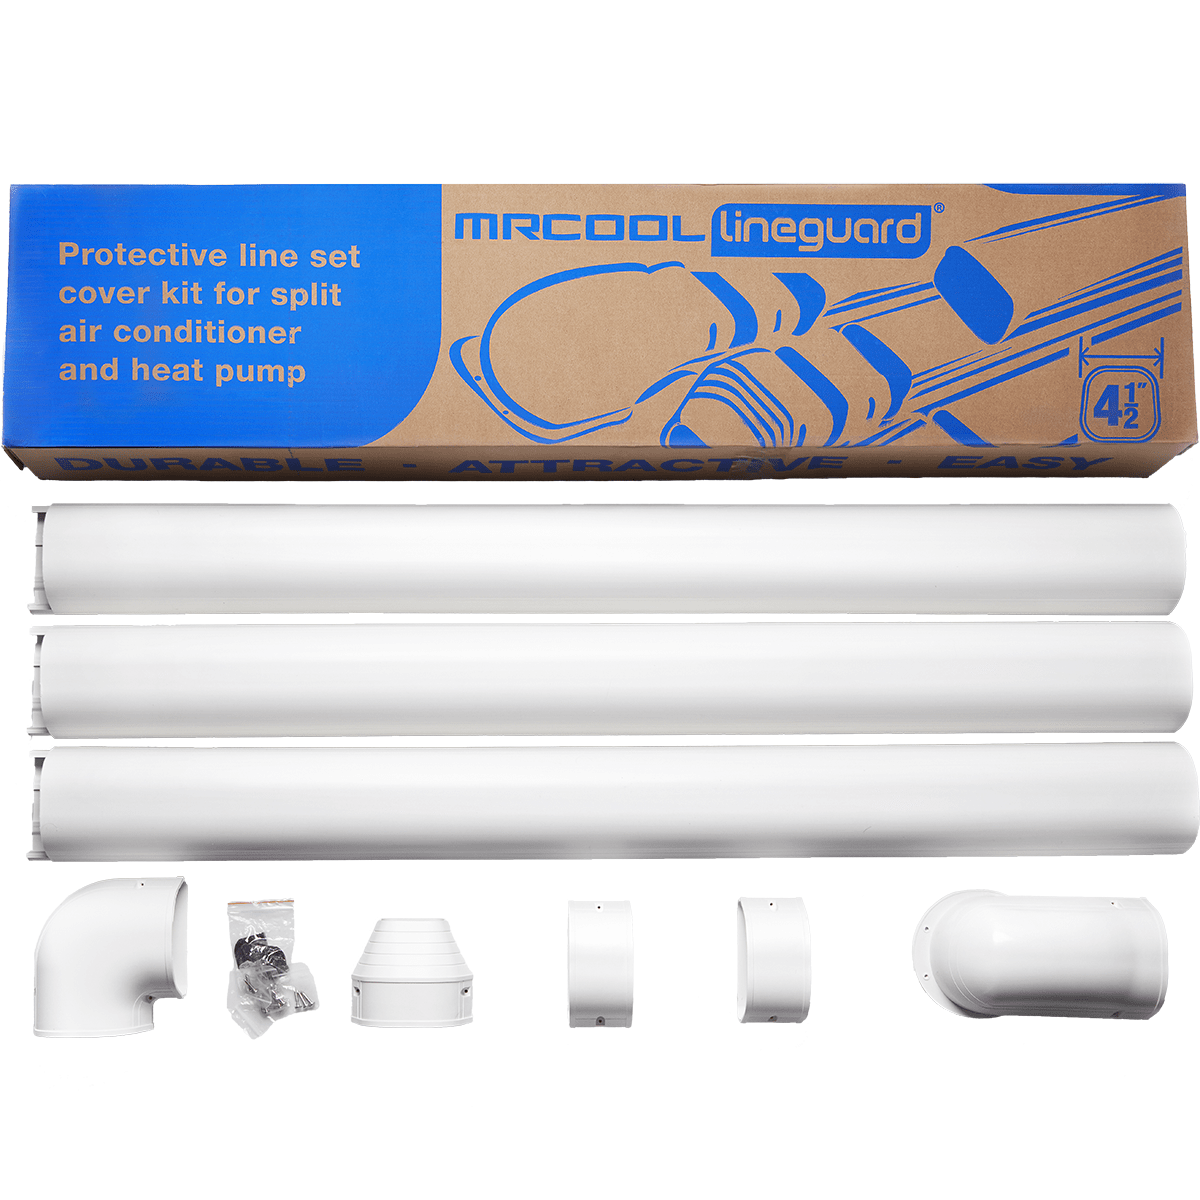 MRCOOL Lineguard Complete Wall Duct Kit (MLG450)